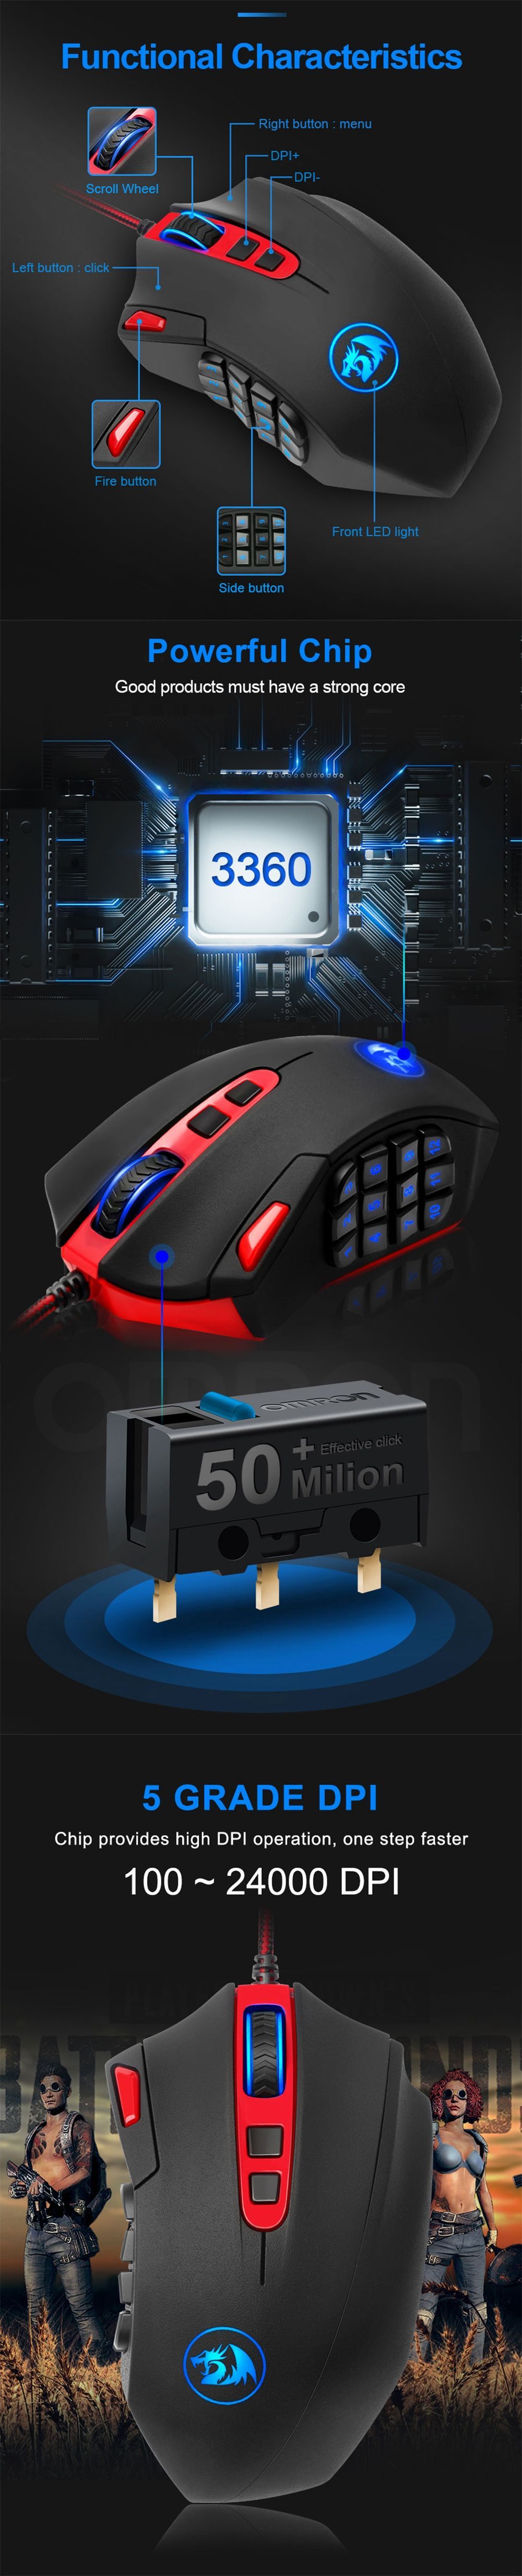 Redragon-M901-19-Buttons-24000-DPI-USB-Wired-Optical-Mouse-5-Colors-Backlight-Ergonomic-Programmable-1598932